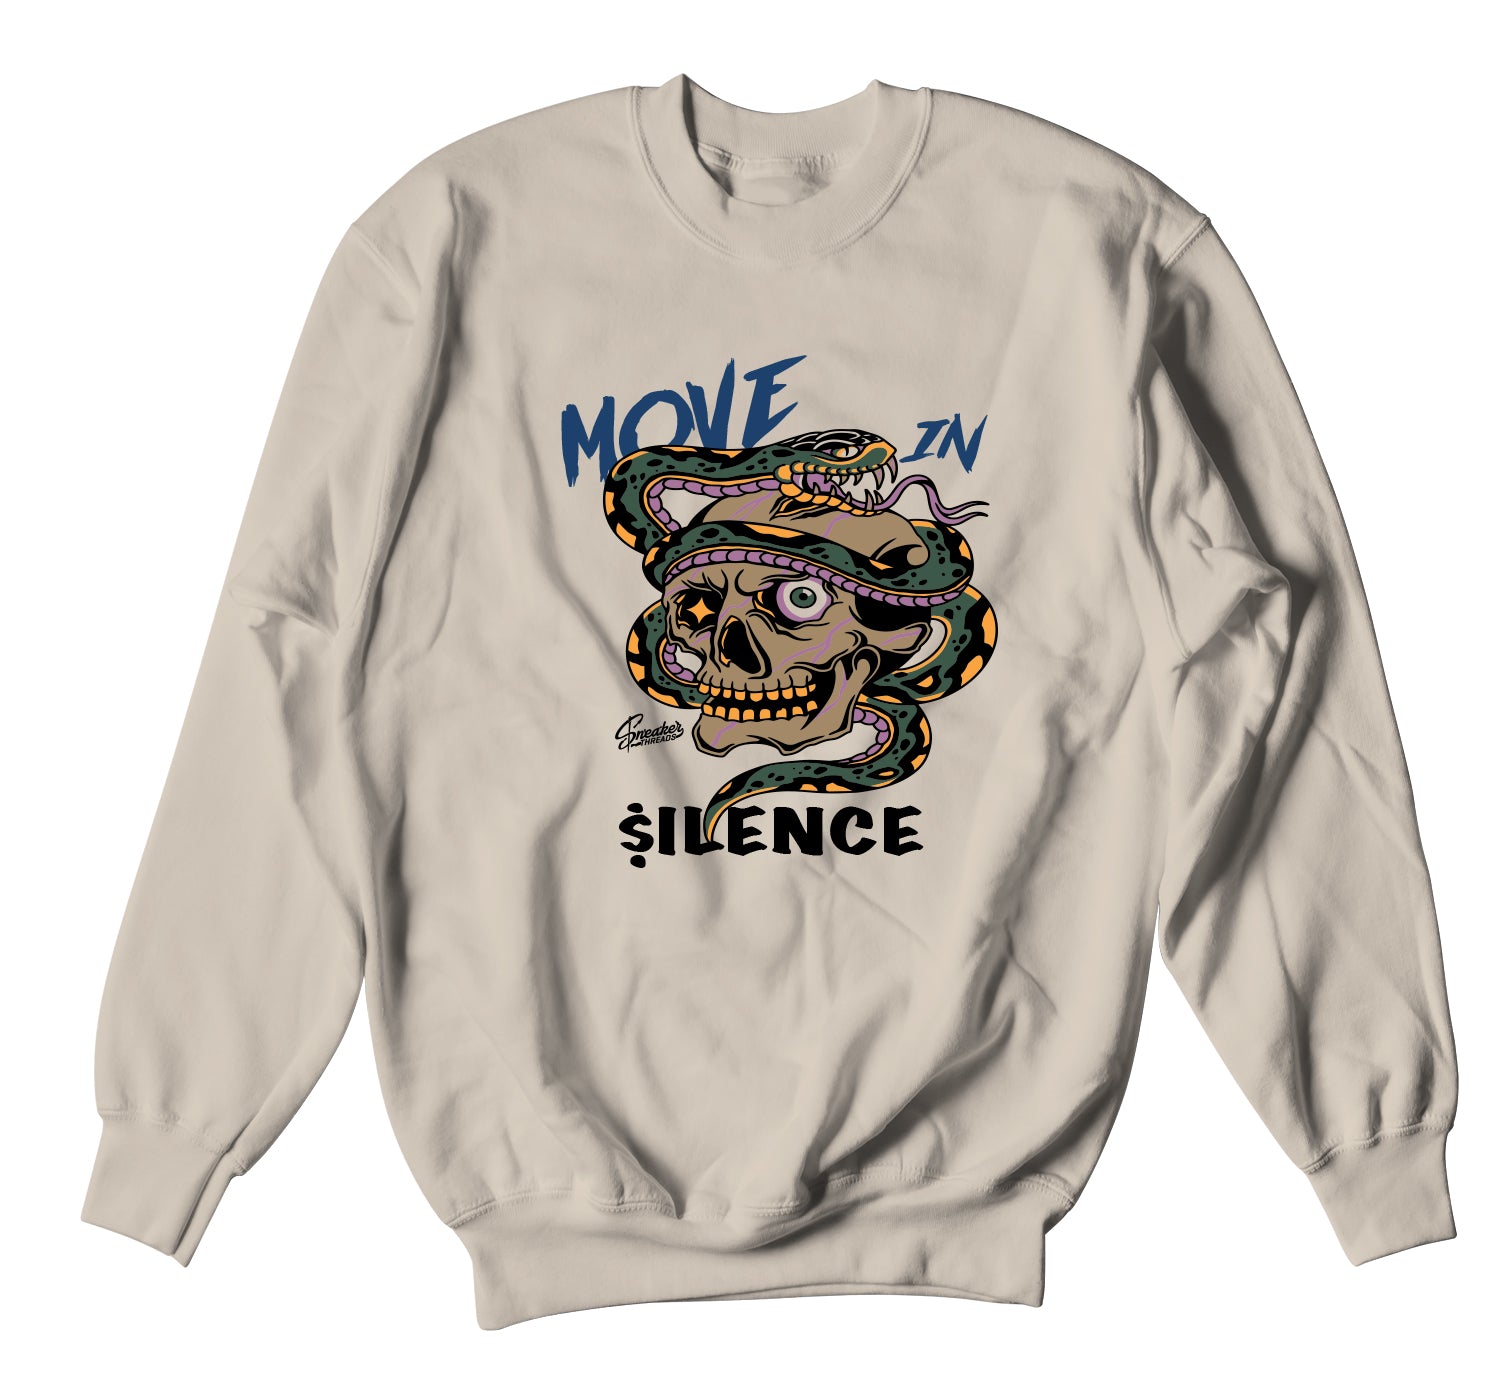 Air Force 1 Travis Scott Sweater - Move In Silence - Sand